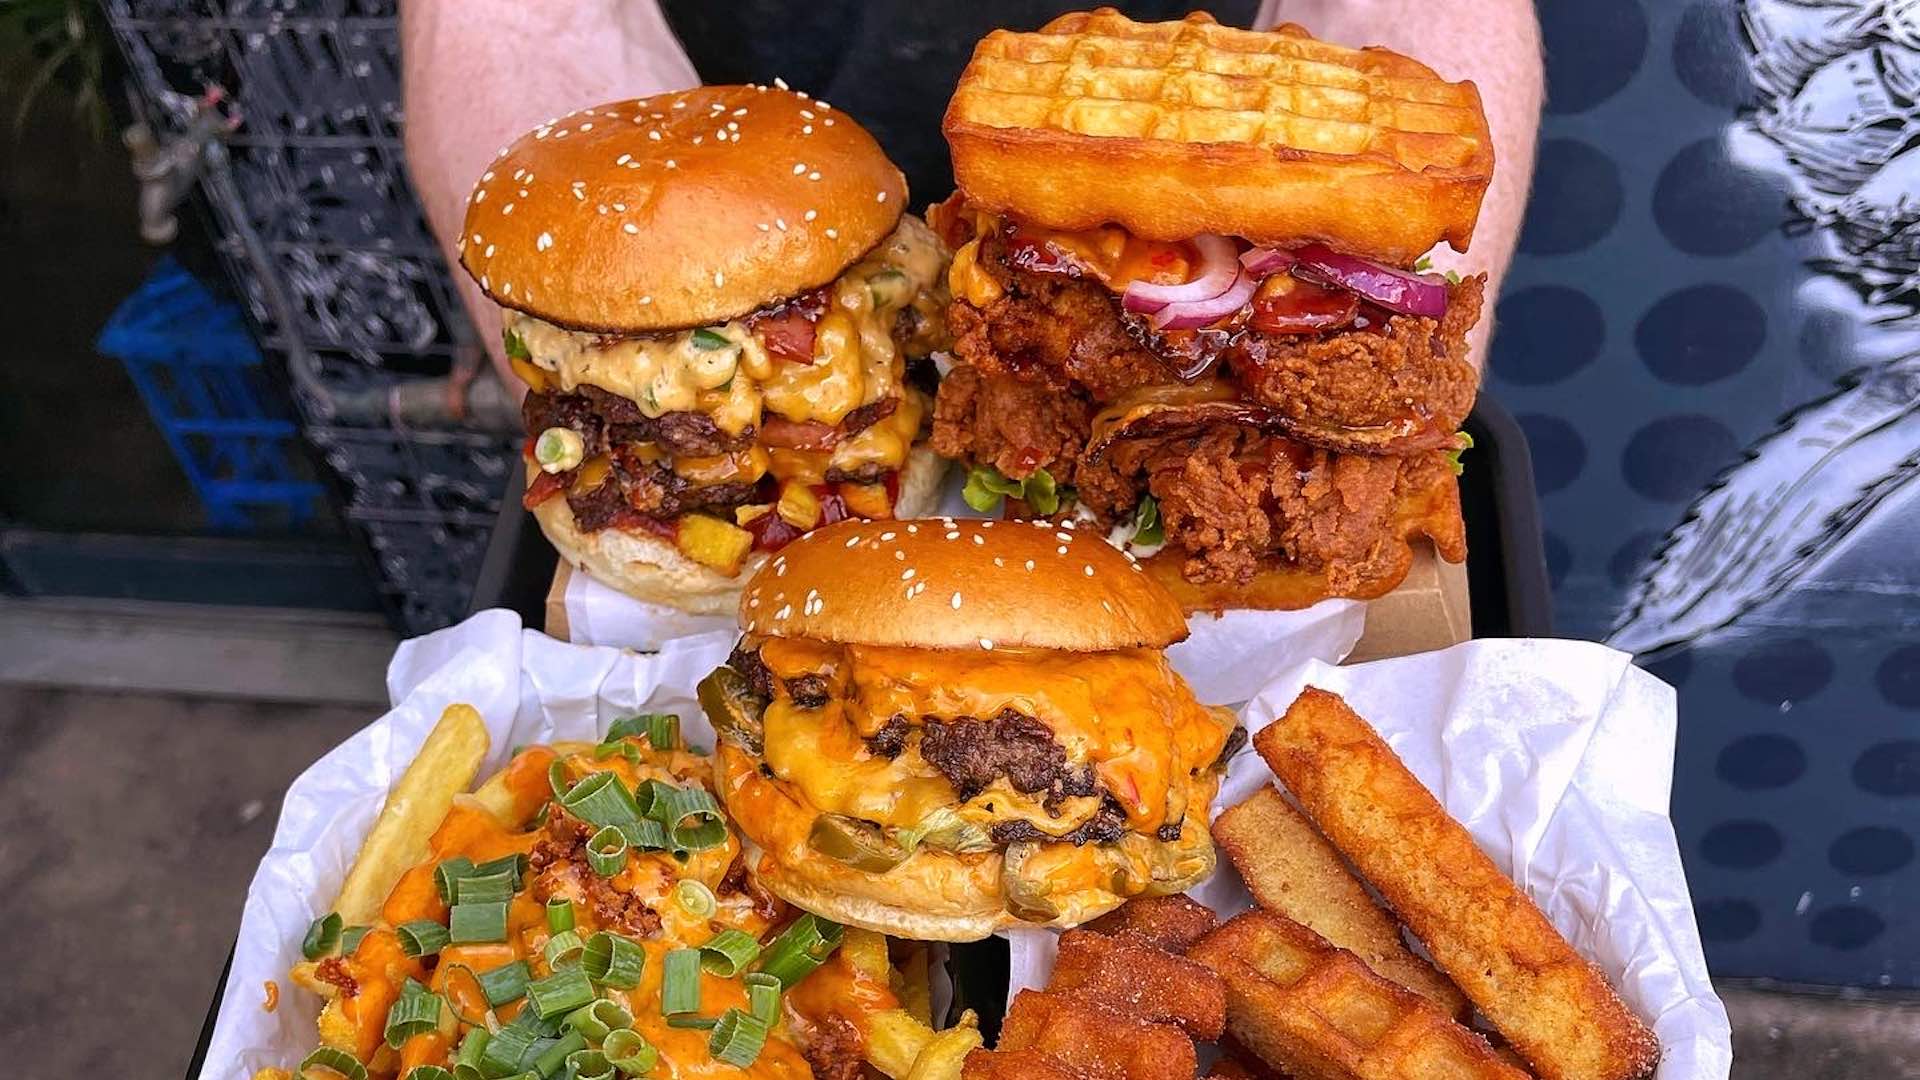 Some of the menu items of Hashtag Burgers and Waffles